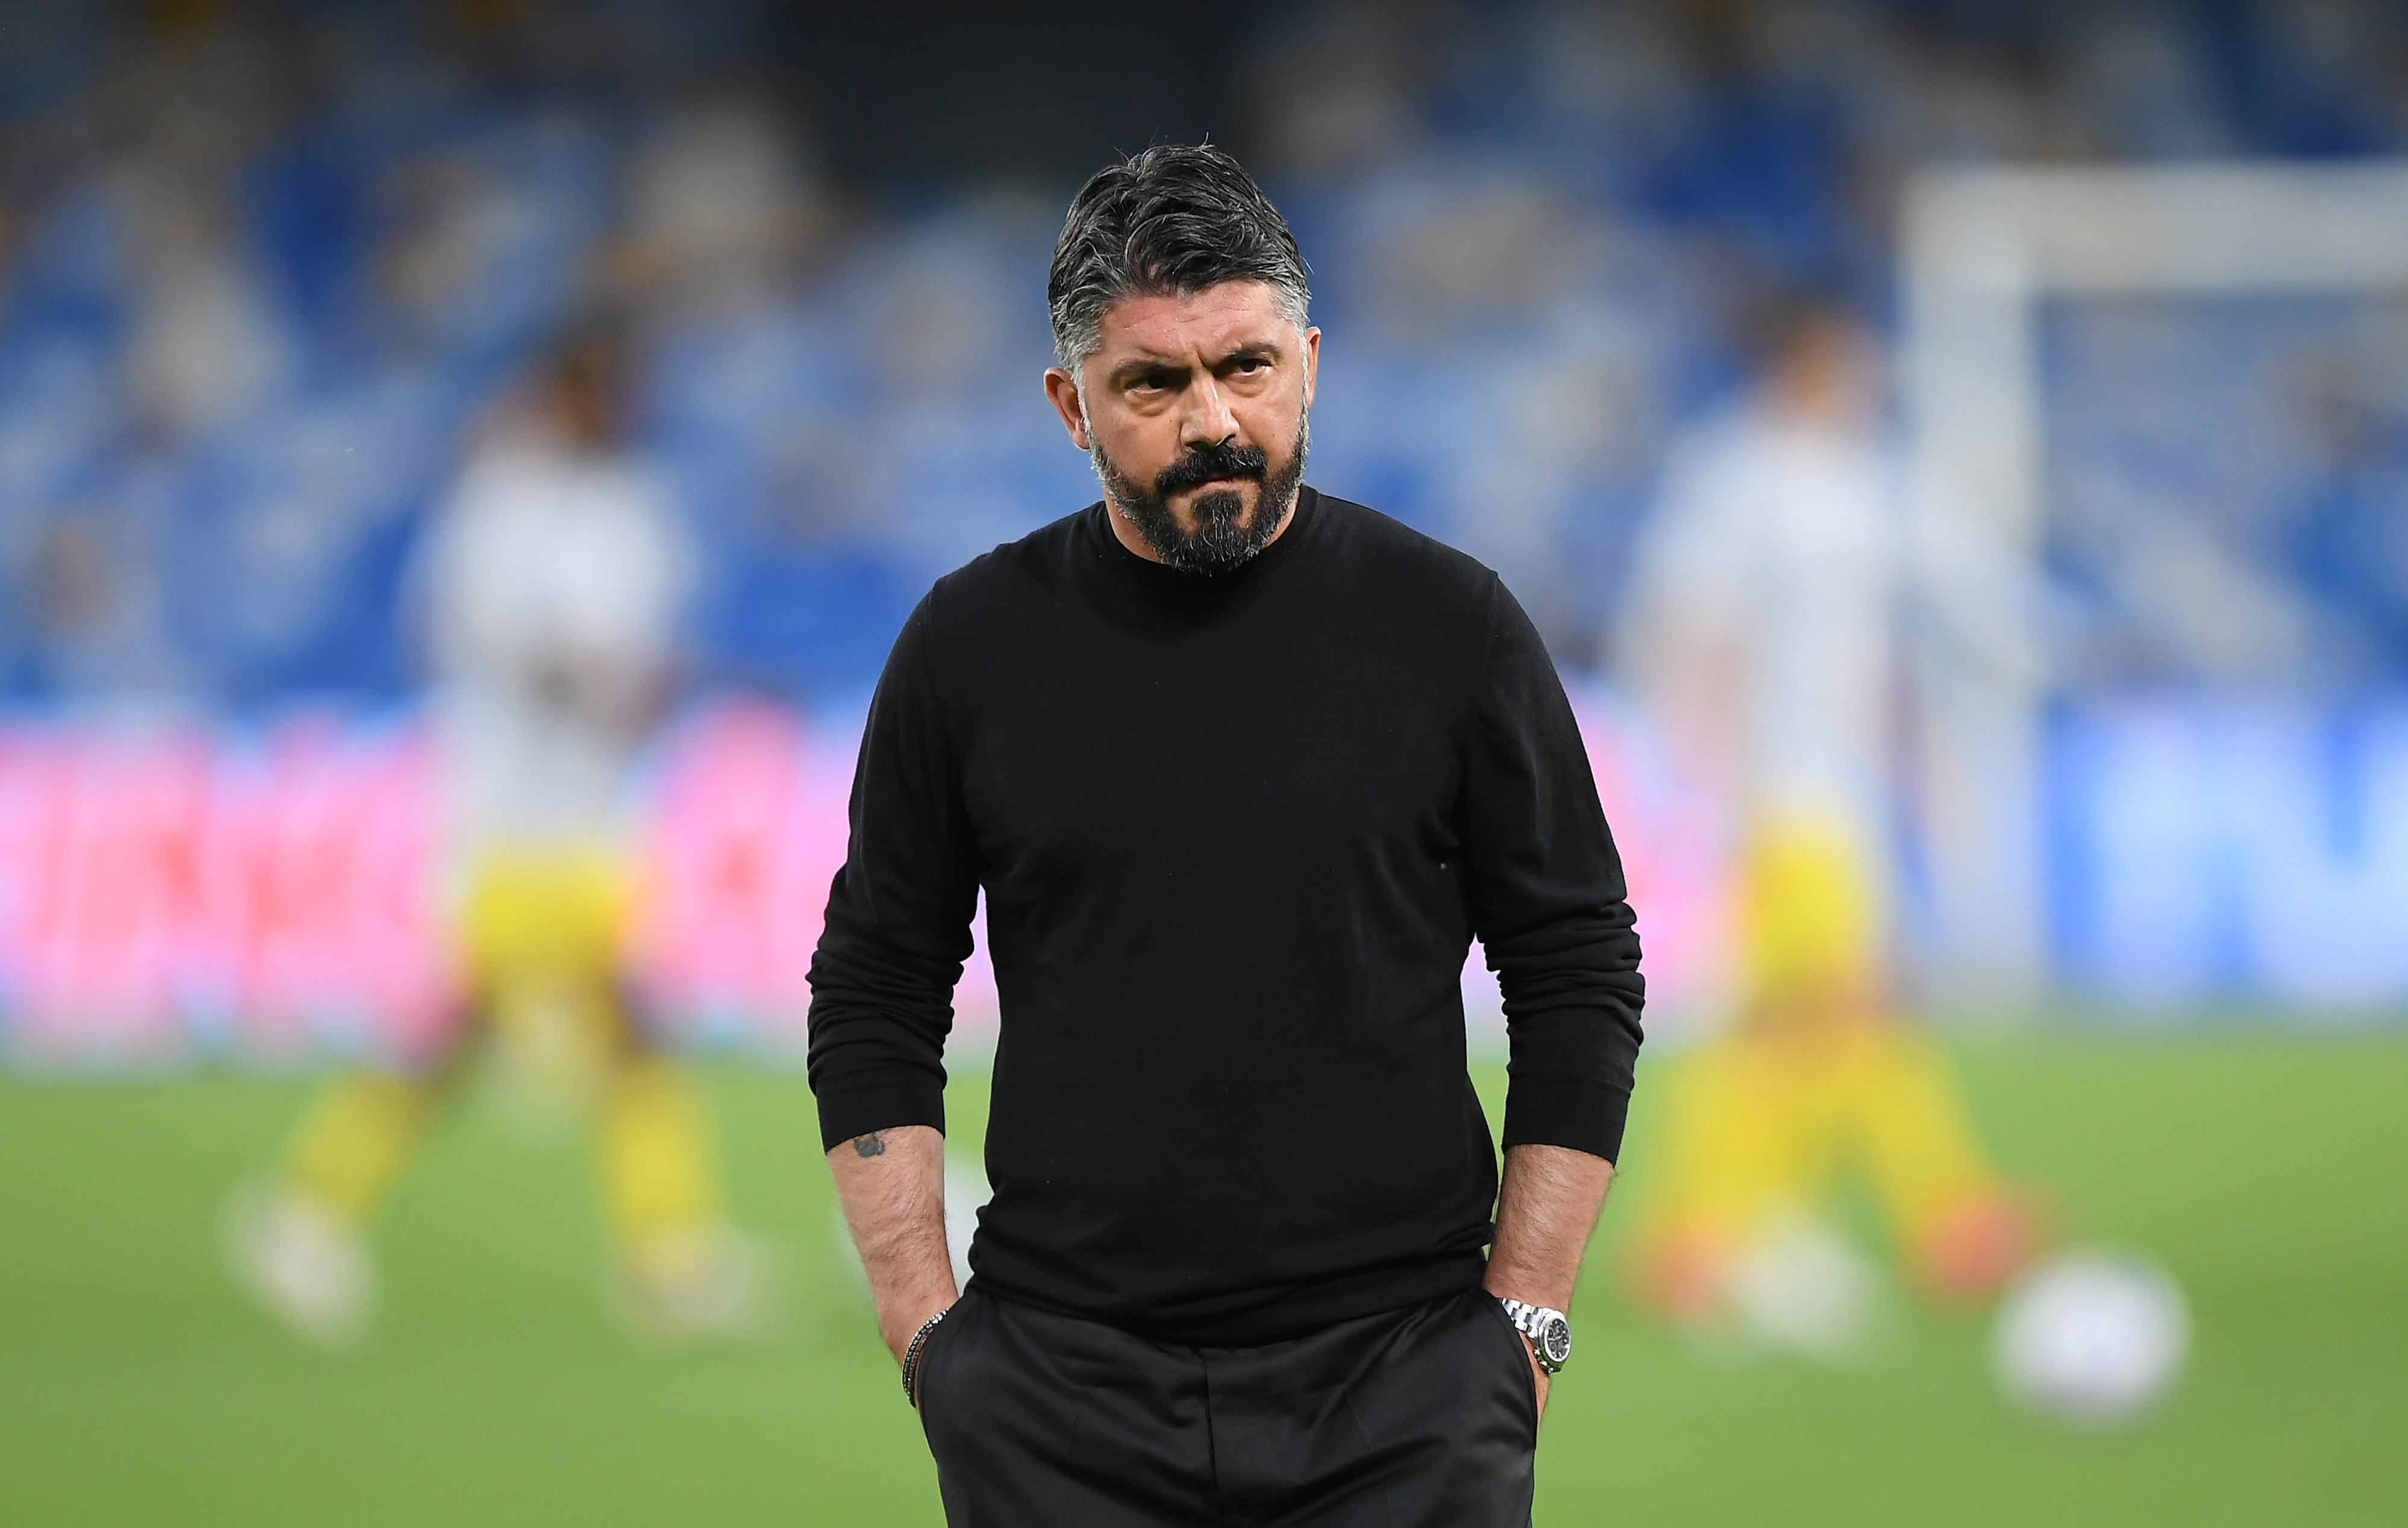 GOAL on Twitter: "Gennaro Gattuso has been sacked as Napoli manager after  missing out on the Champions League 👋 https://t.co/84IVJeobTV" / Twitter